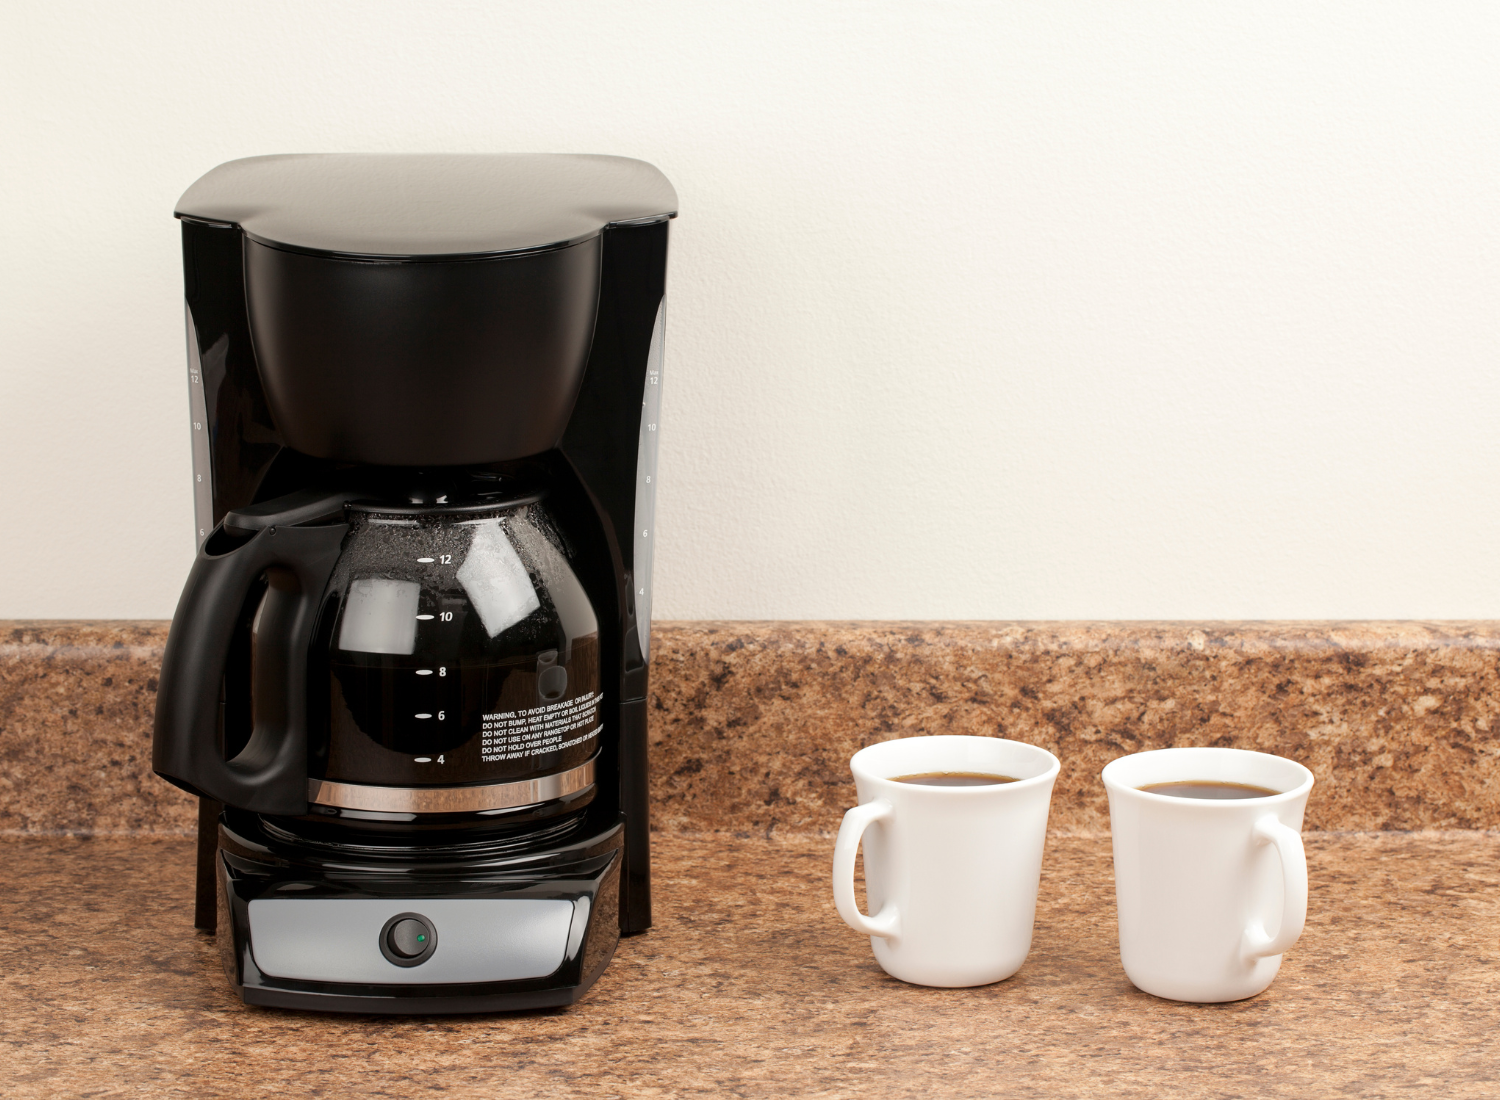 Stock image of a coffee maker,